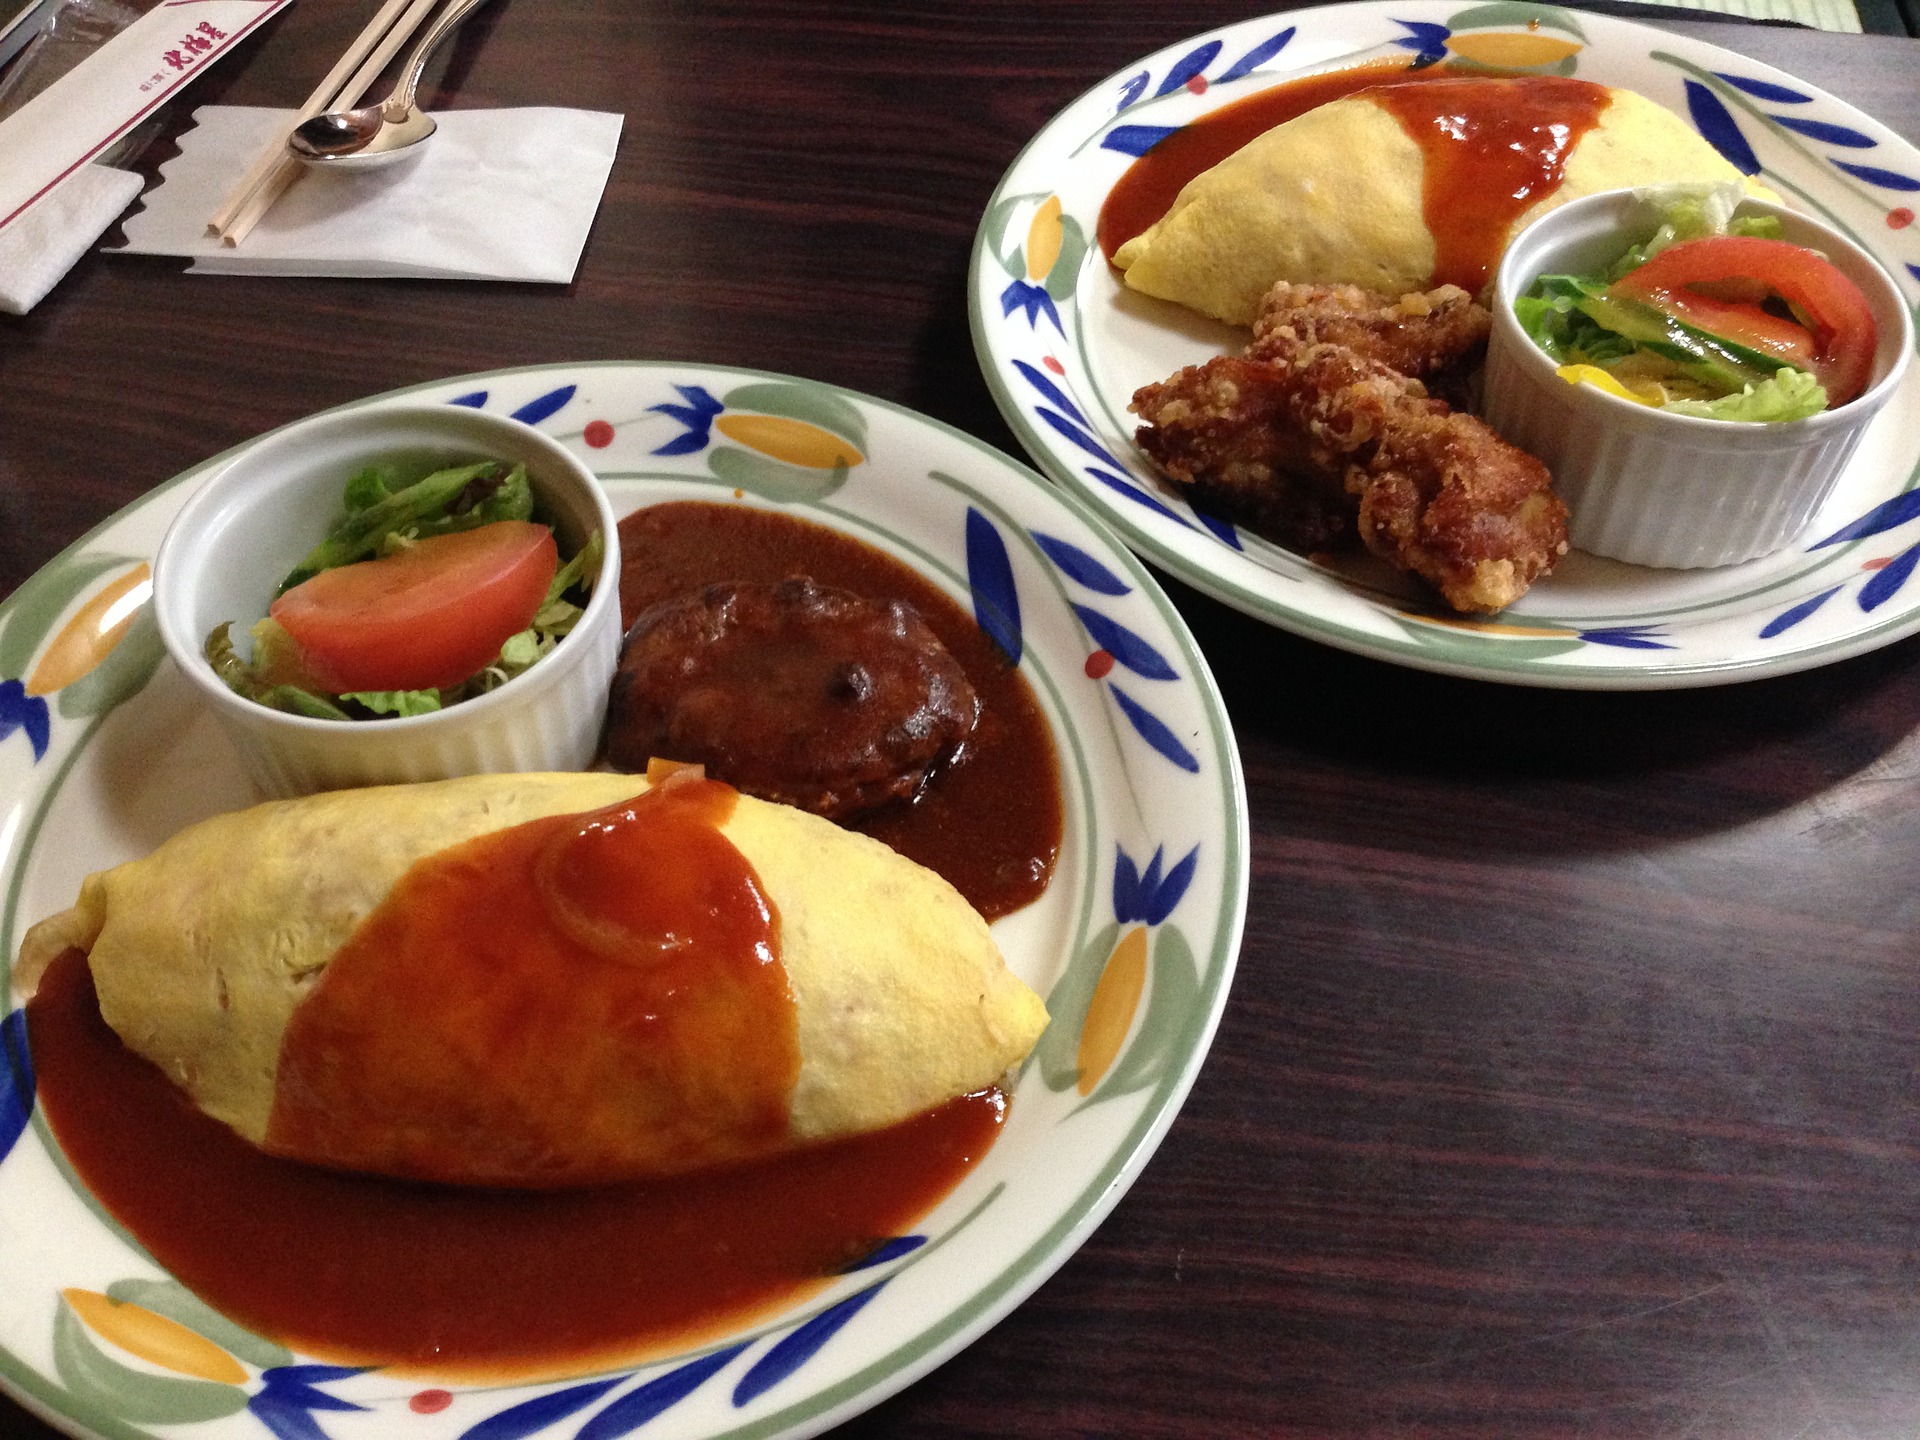 Omurice: l'omelette nipponica